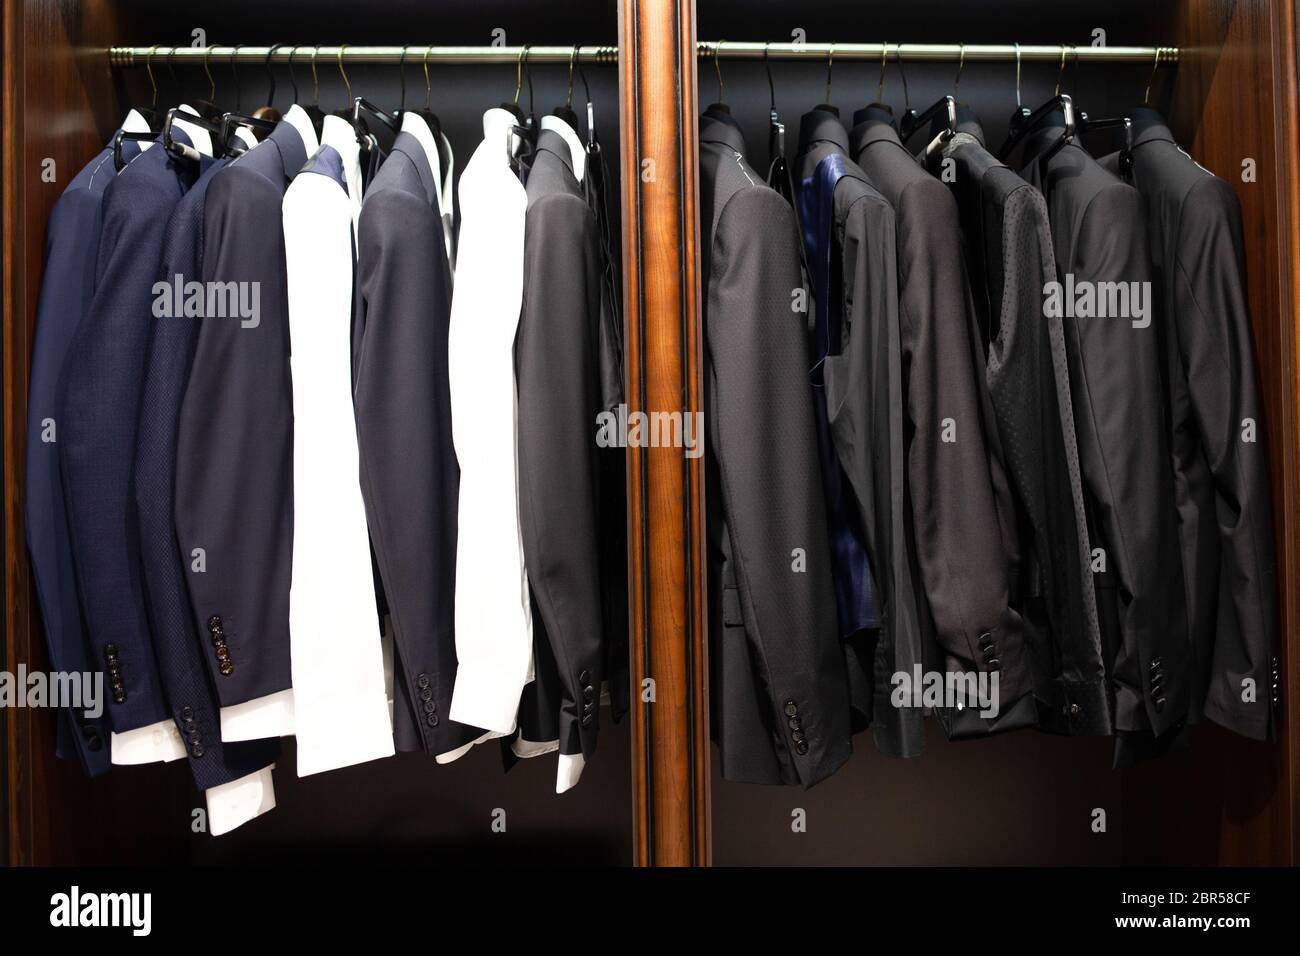 Many men's suits on a hanger in the store Stock Photo